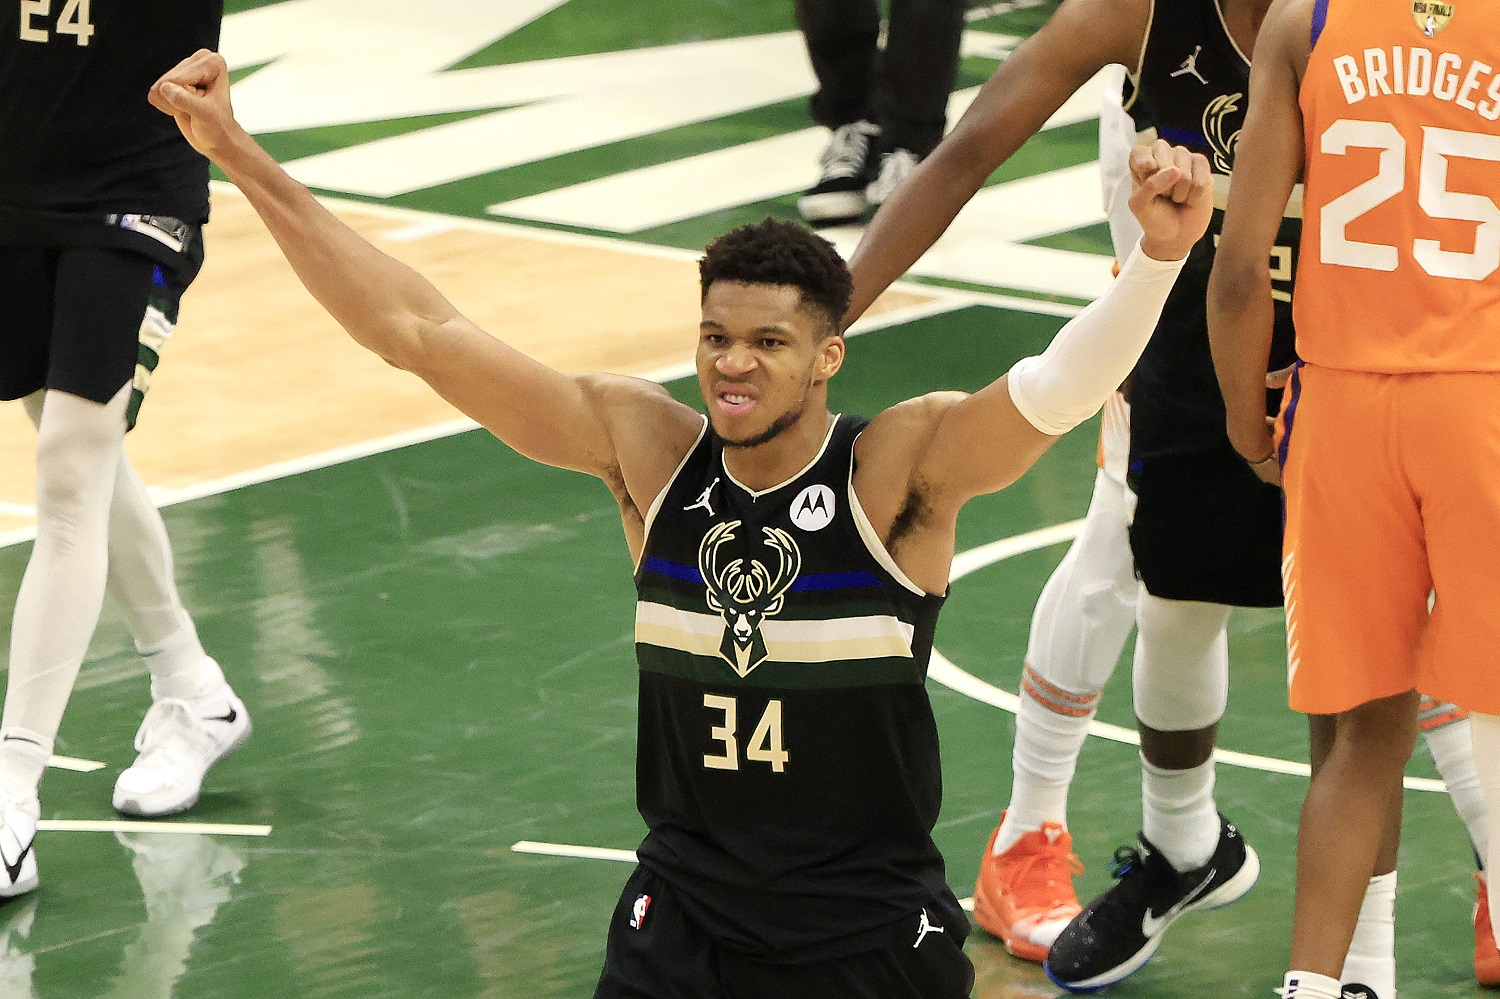 Giannis Antetokounmpo of the Milwaukee Bucks celebrates in the final seconds before defeating the Phoenix Suns in Game 6 to win the NBA championship. | Justin Casterline/Getty Images